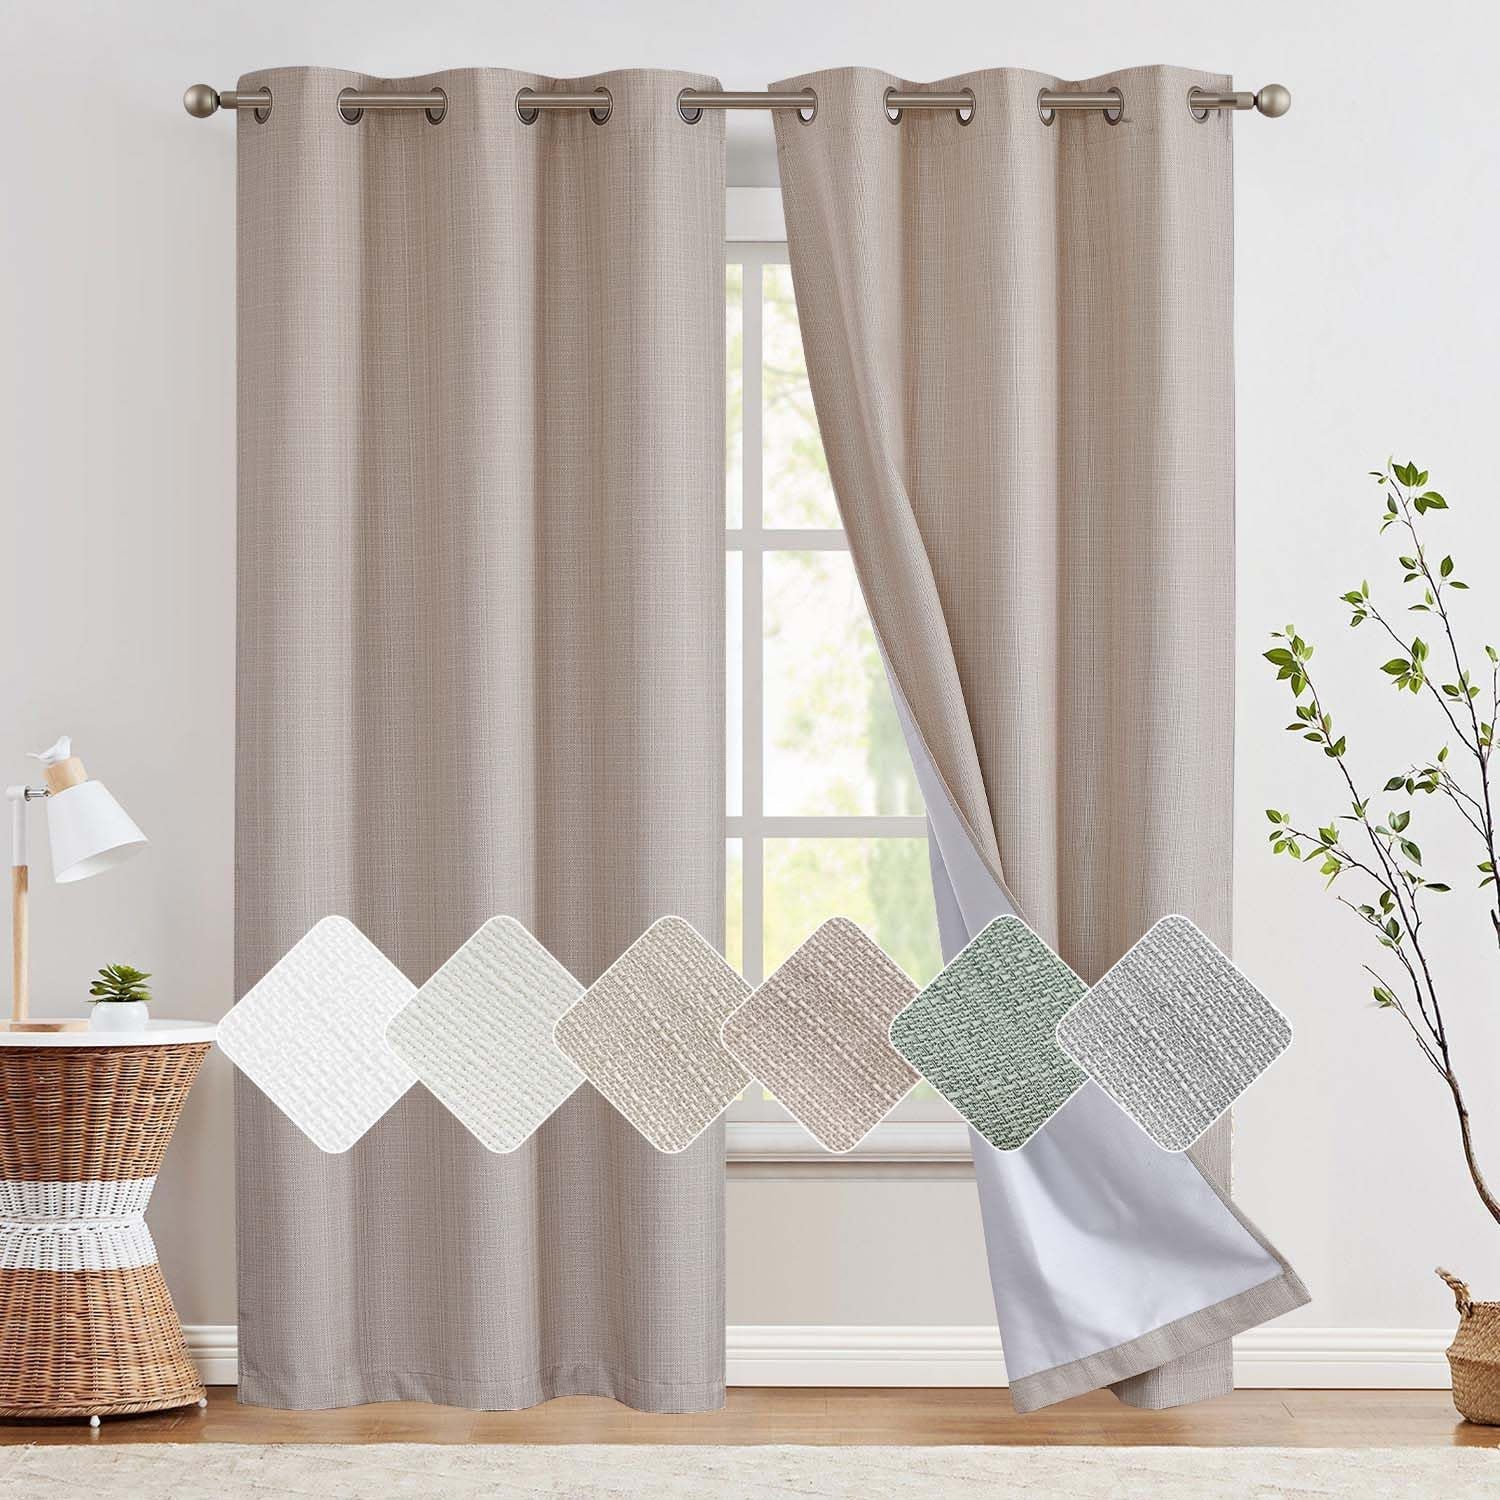 Jinchan 100% Blackout Curtains for Bedroom Living Room Linen Blackout Curtains 84 Inch Long Room Darkening Curtains Linen Textured Drapes 2 Panels Window Curtains Grommet Top Heathered Beige  CKNY HOME FASHION   